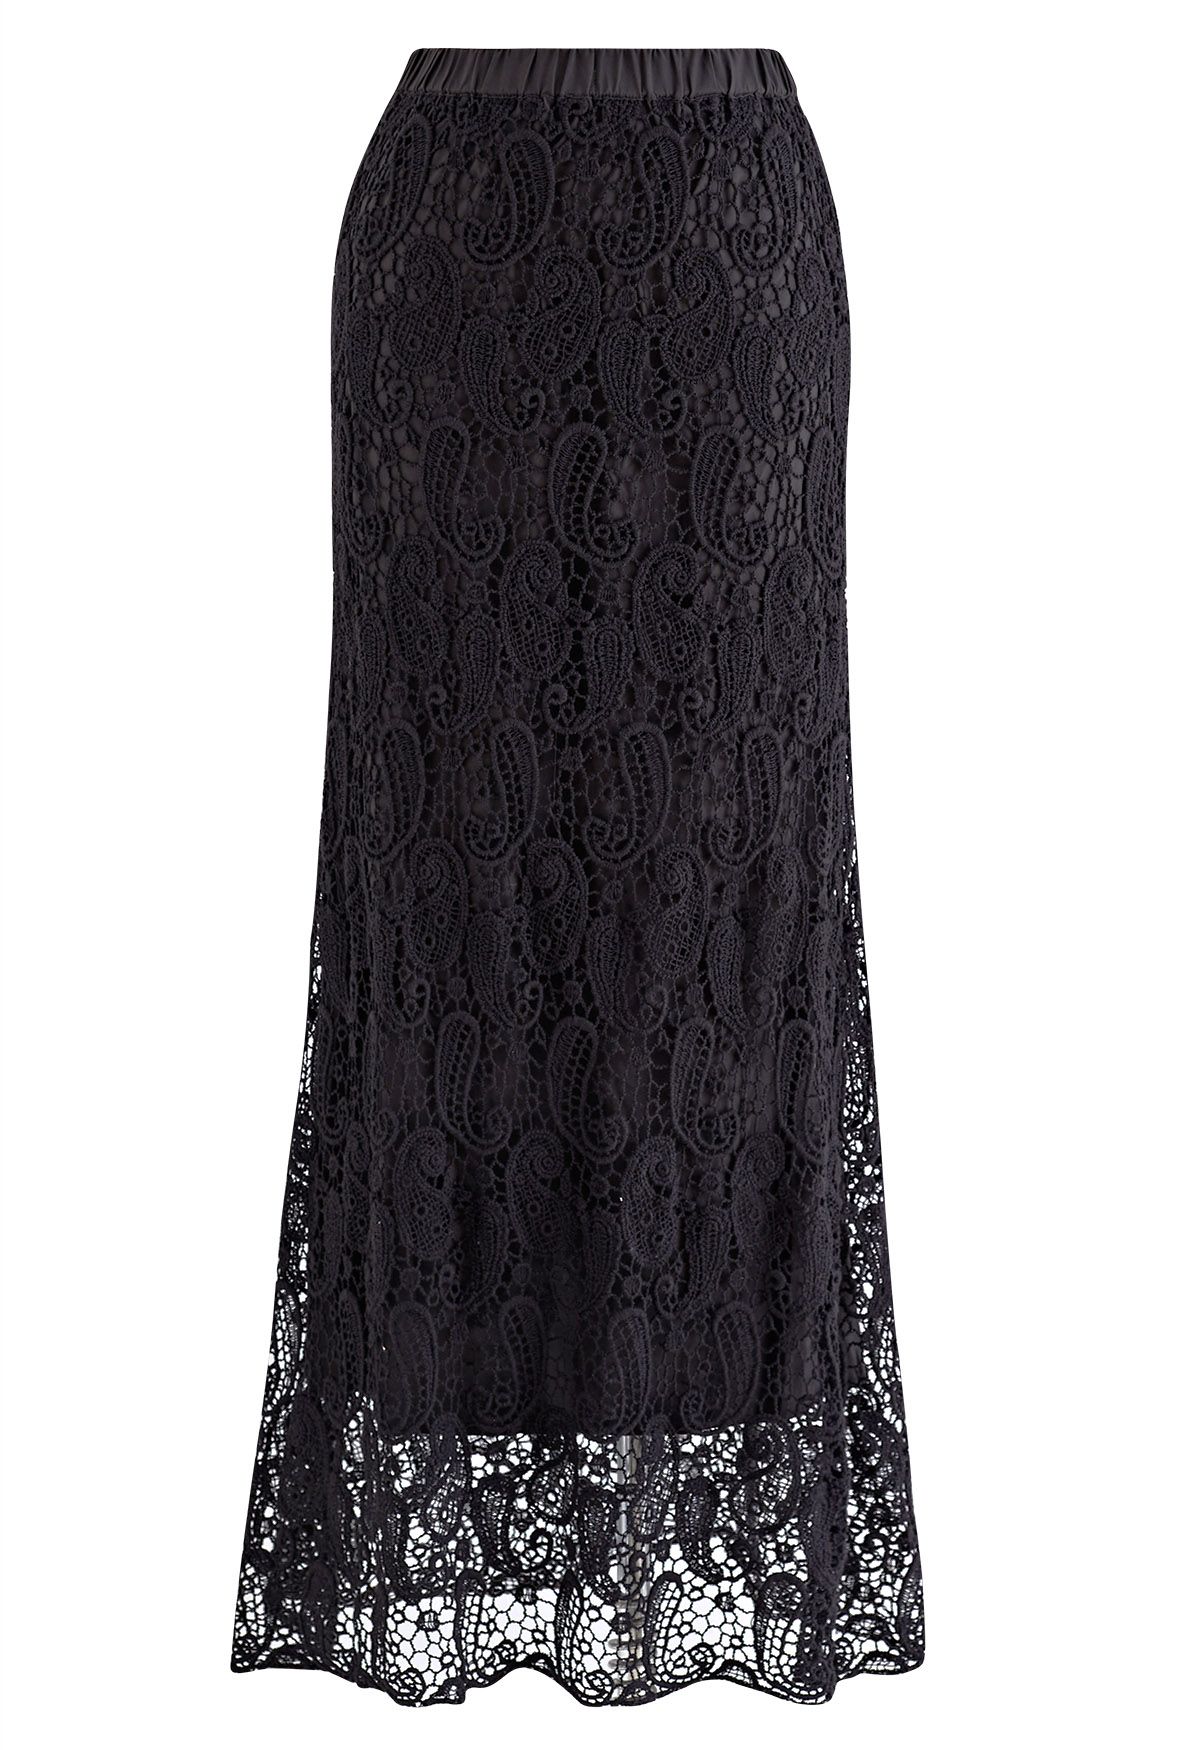 Paisley Cutwork Lace Maxi Skirt in Black - Retro, Indie and Unique Fashion